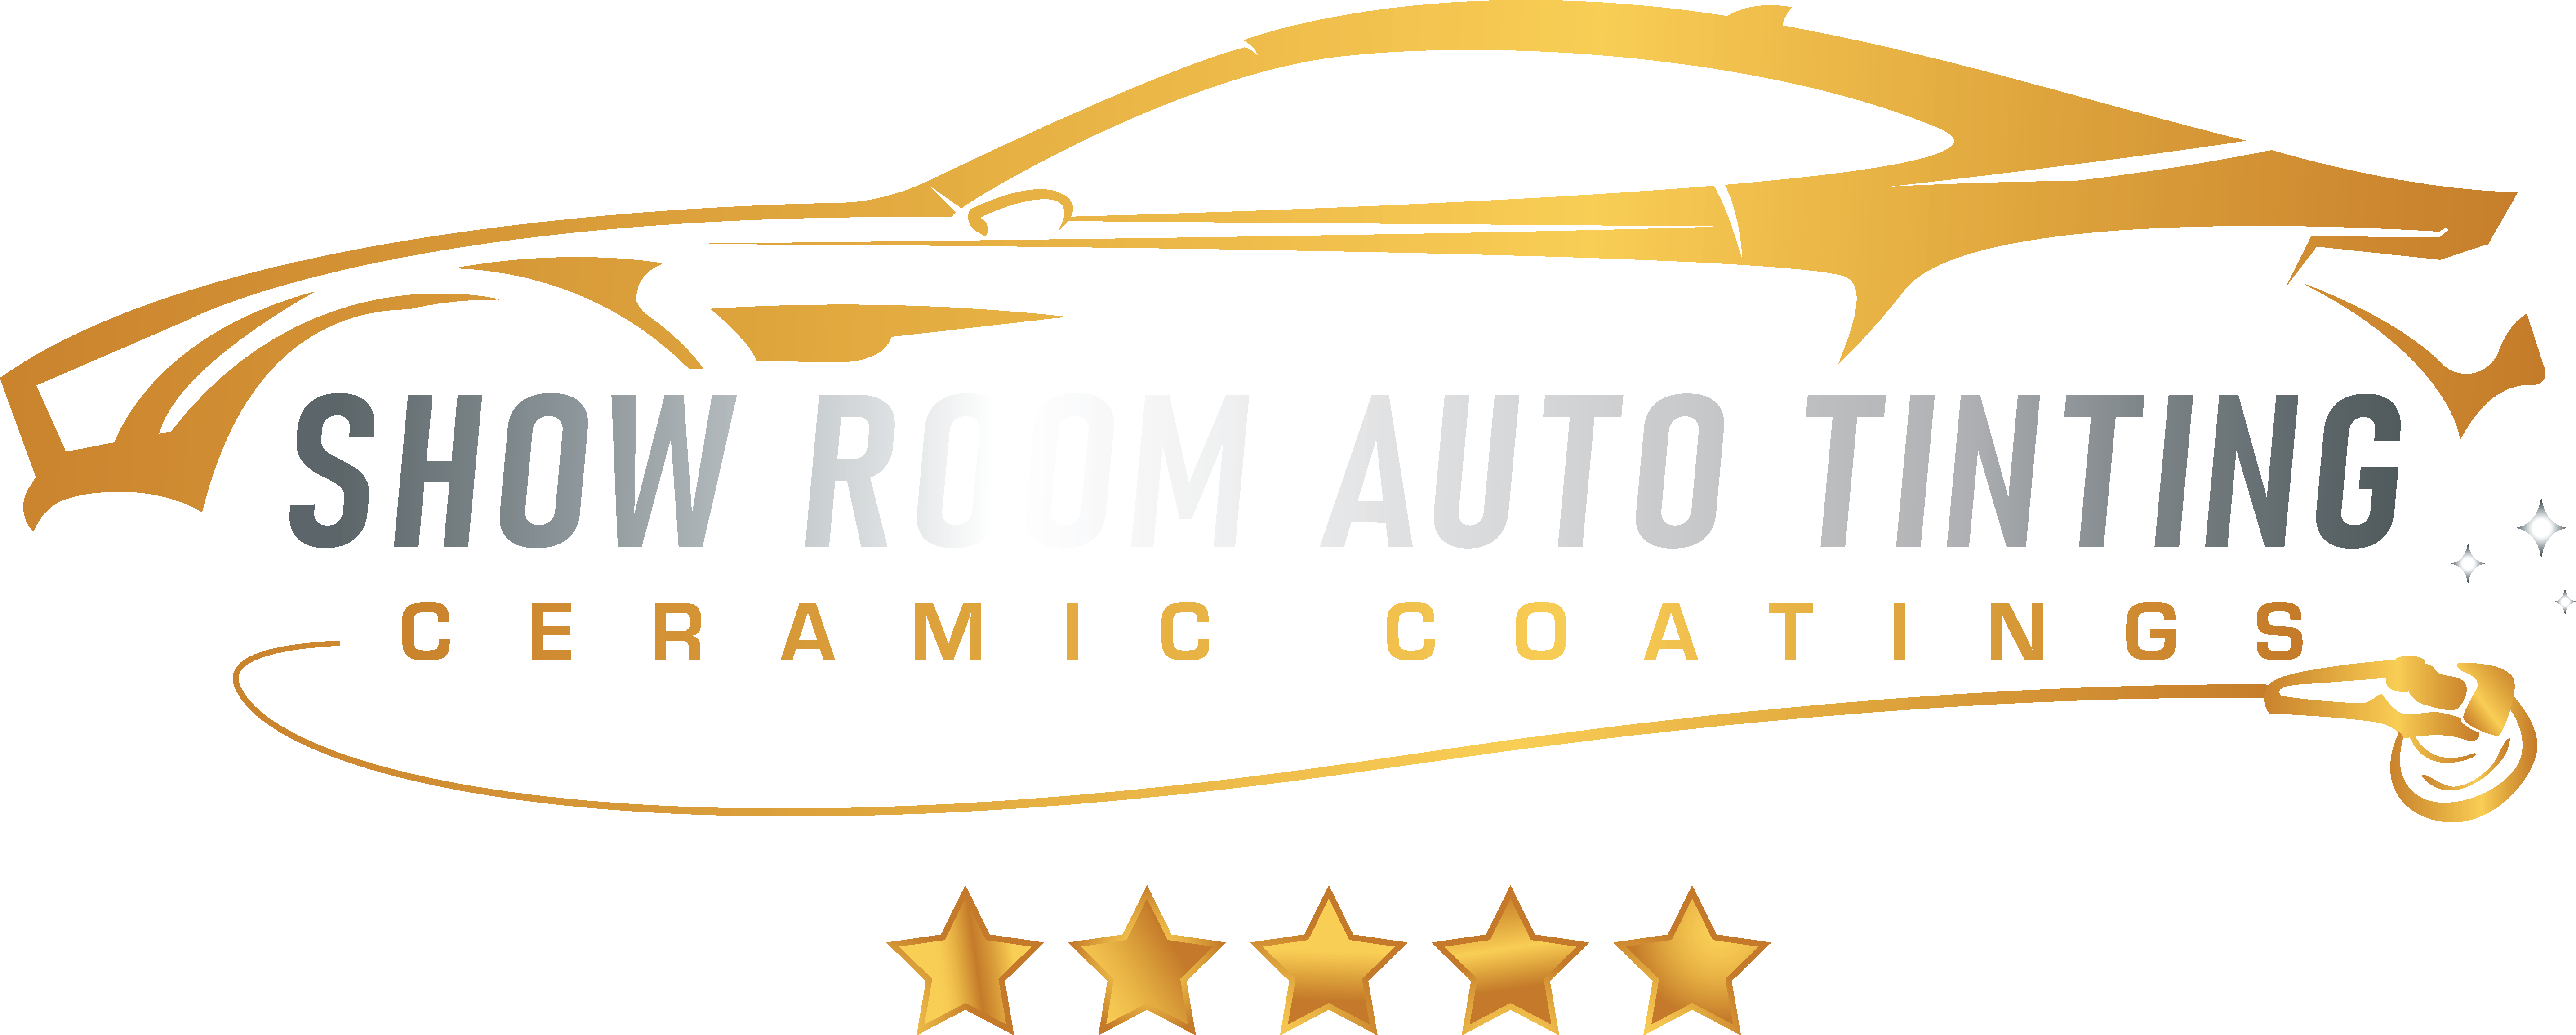 Shop Ceramic Coating For Car 5 Years with great discounts and prices online  - Oct 2023